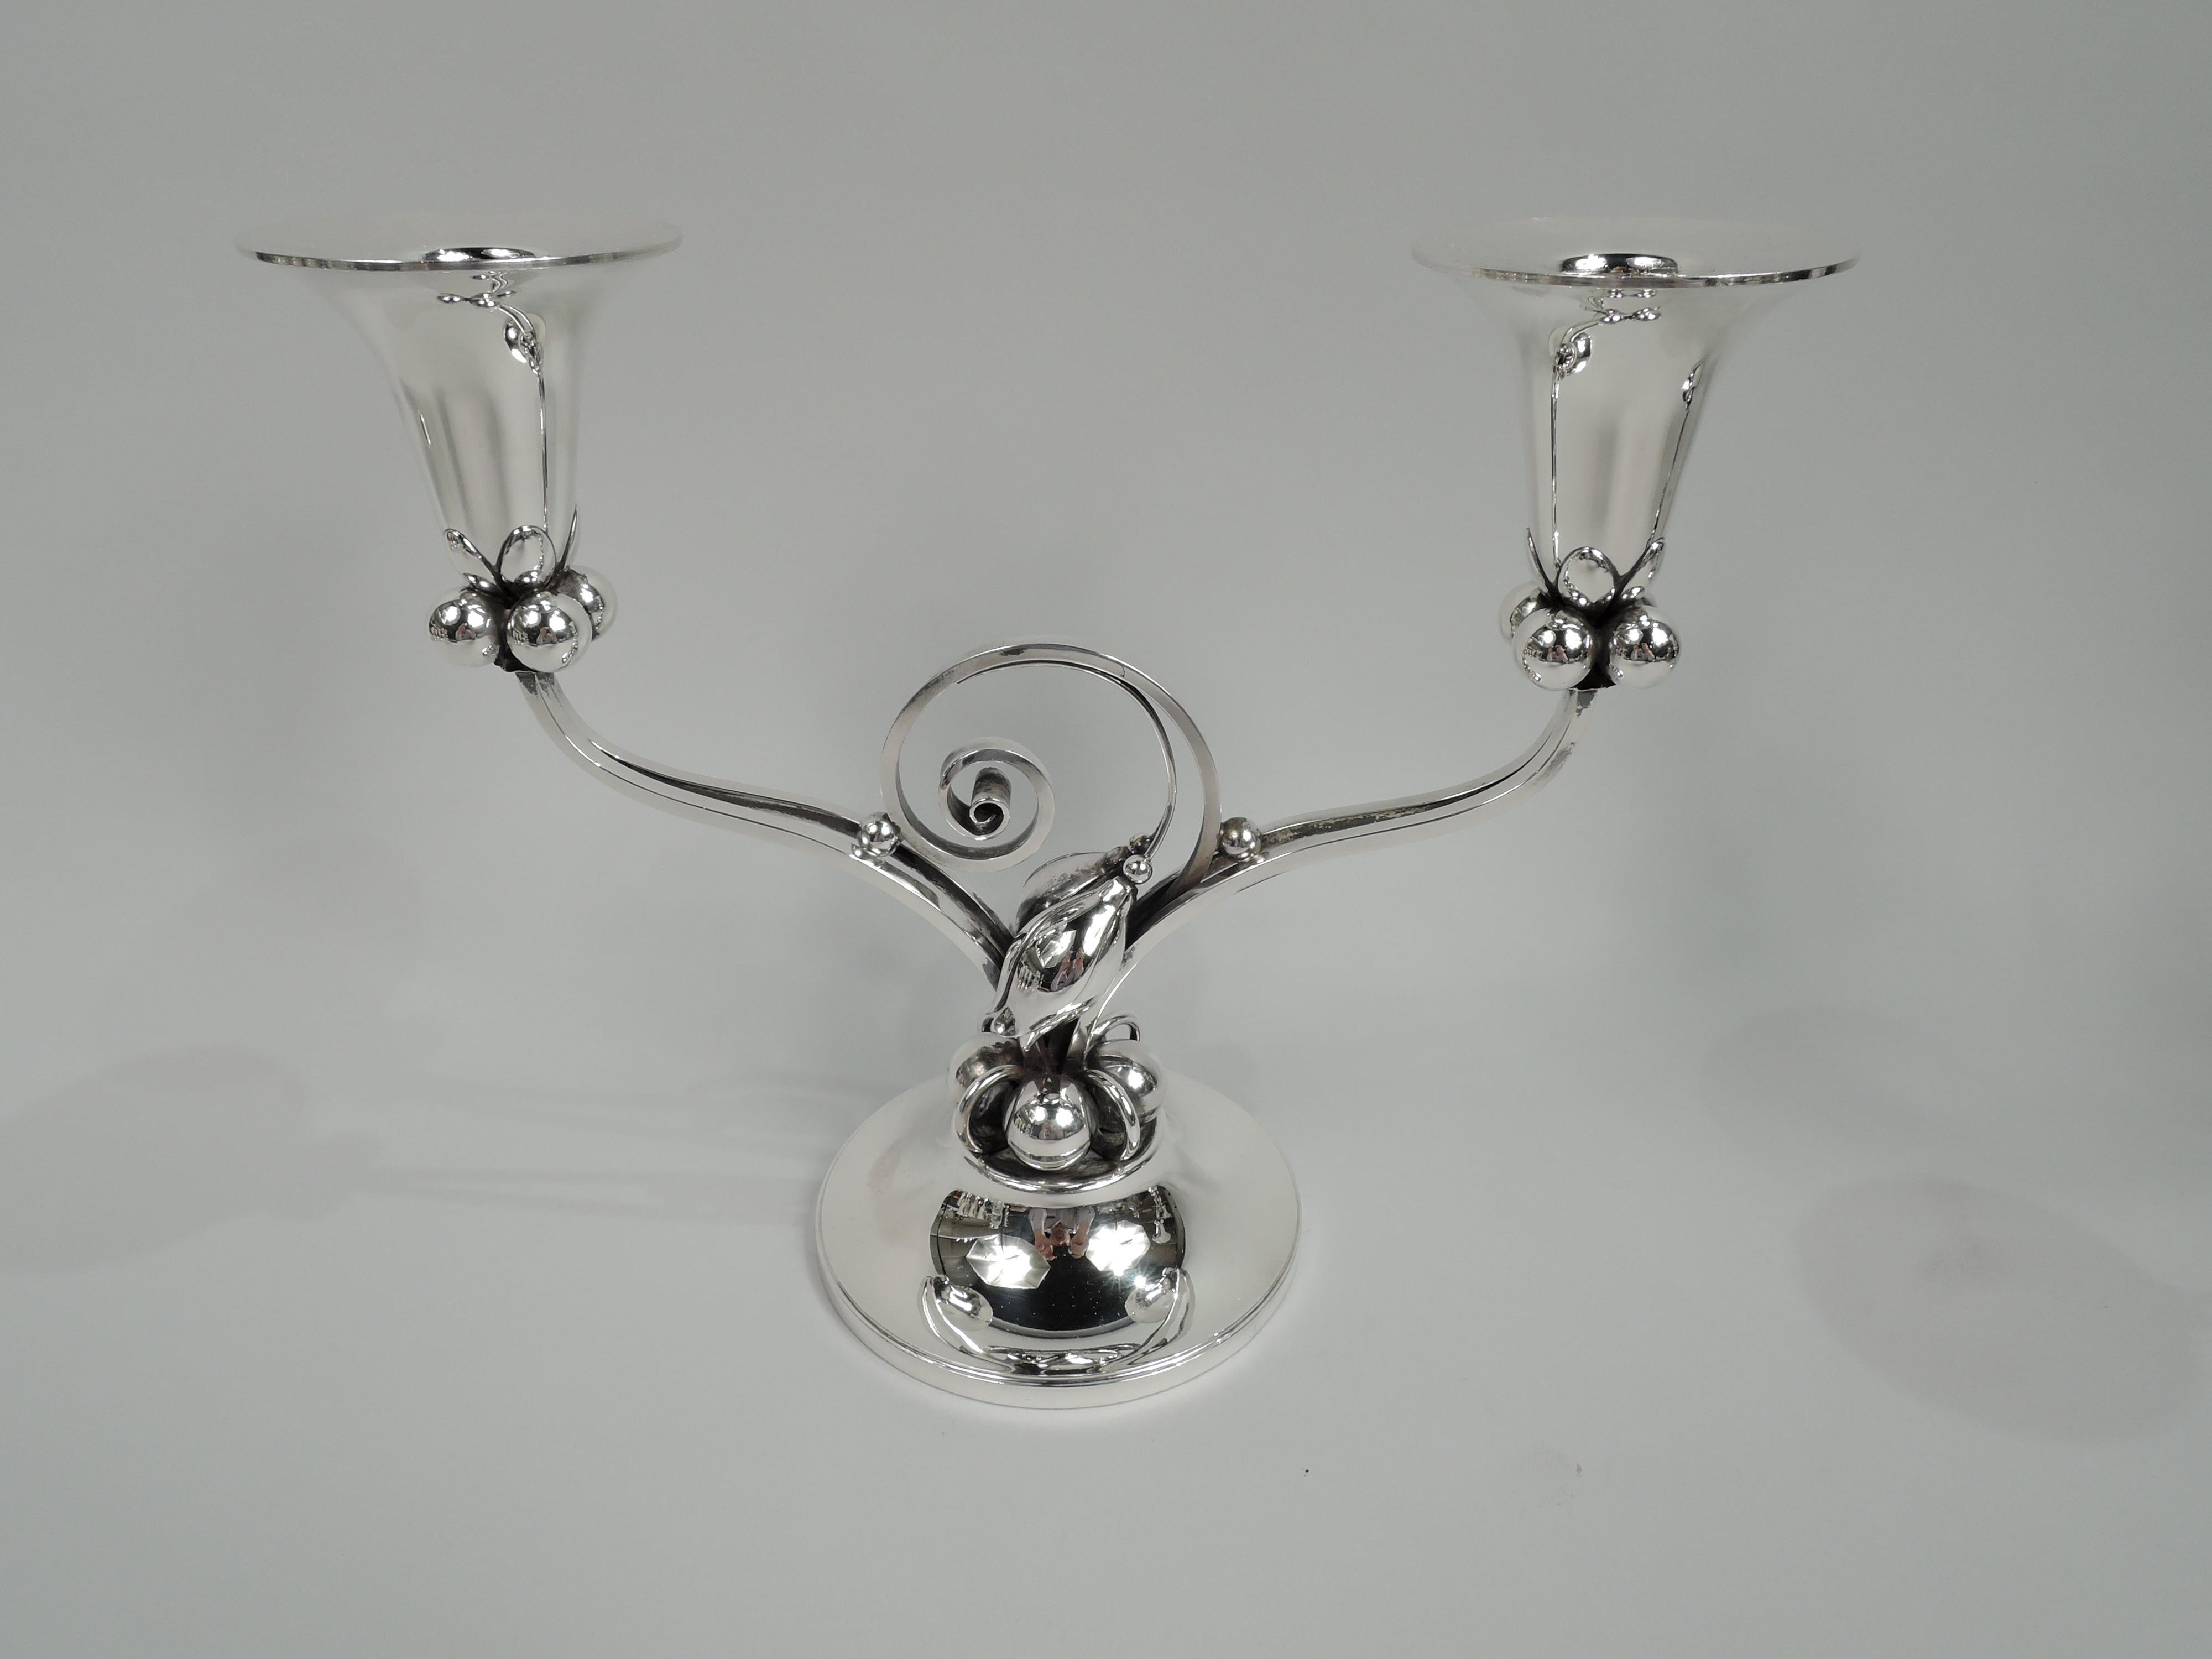 Pair of Mid-Century Modern sterling silver 2-light candelabra. Designed by Alphonse La Paglia (d. 1953) for International Silver Co. in Meriden, Conn. Two arms, each comprising two open quadrilateral scrolls inset at center with volute scroll